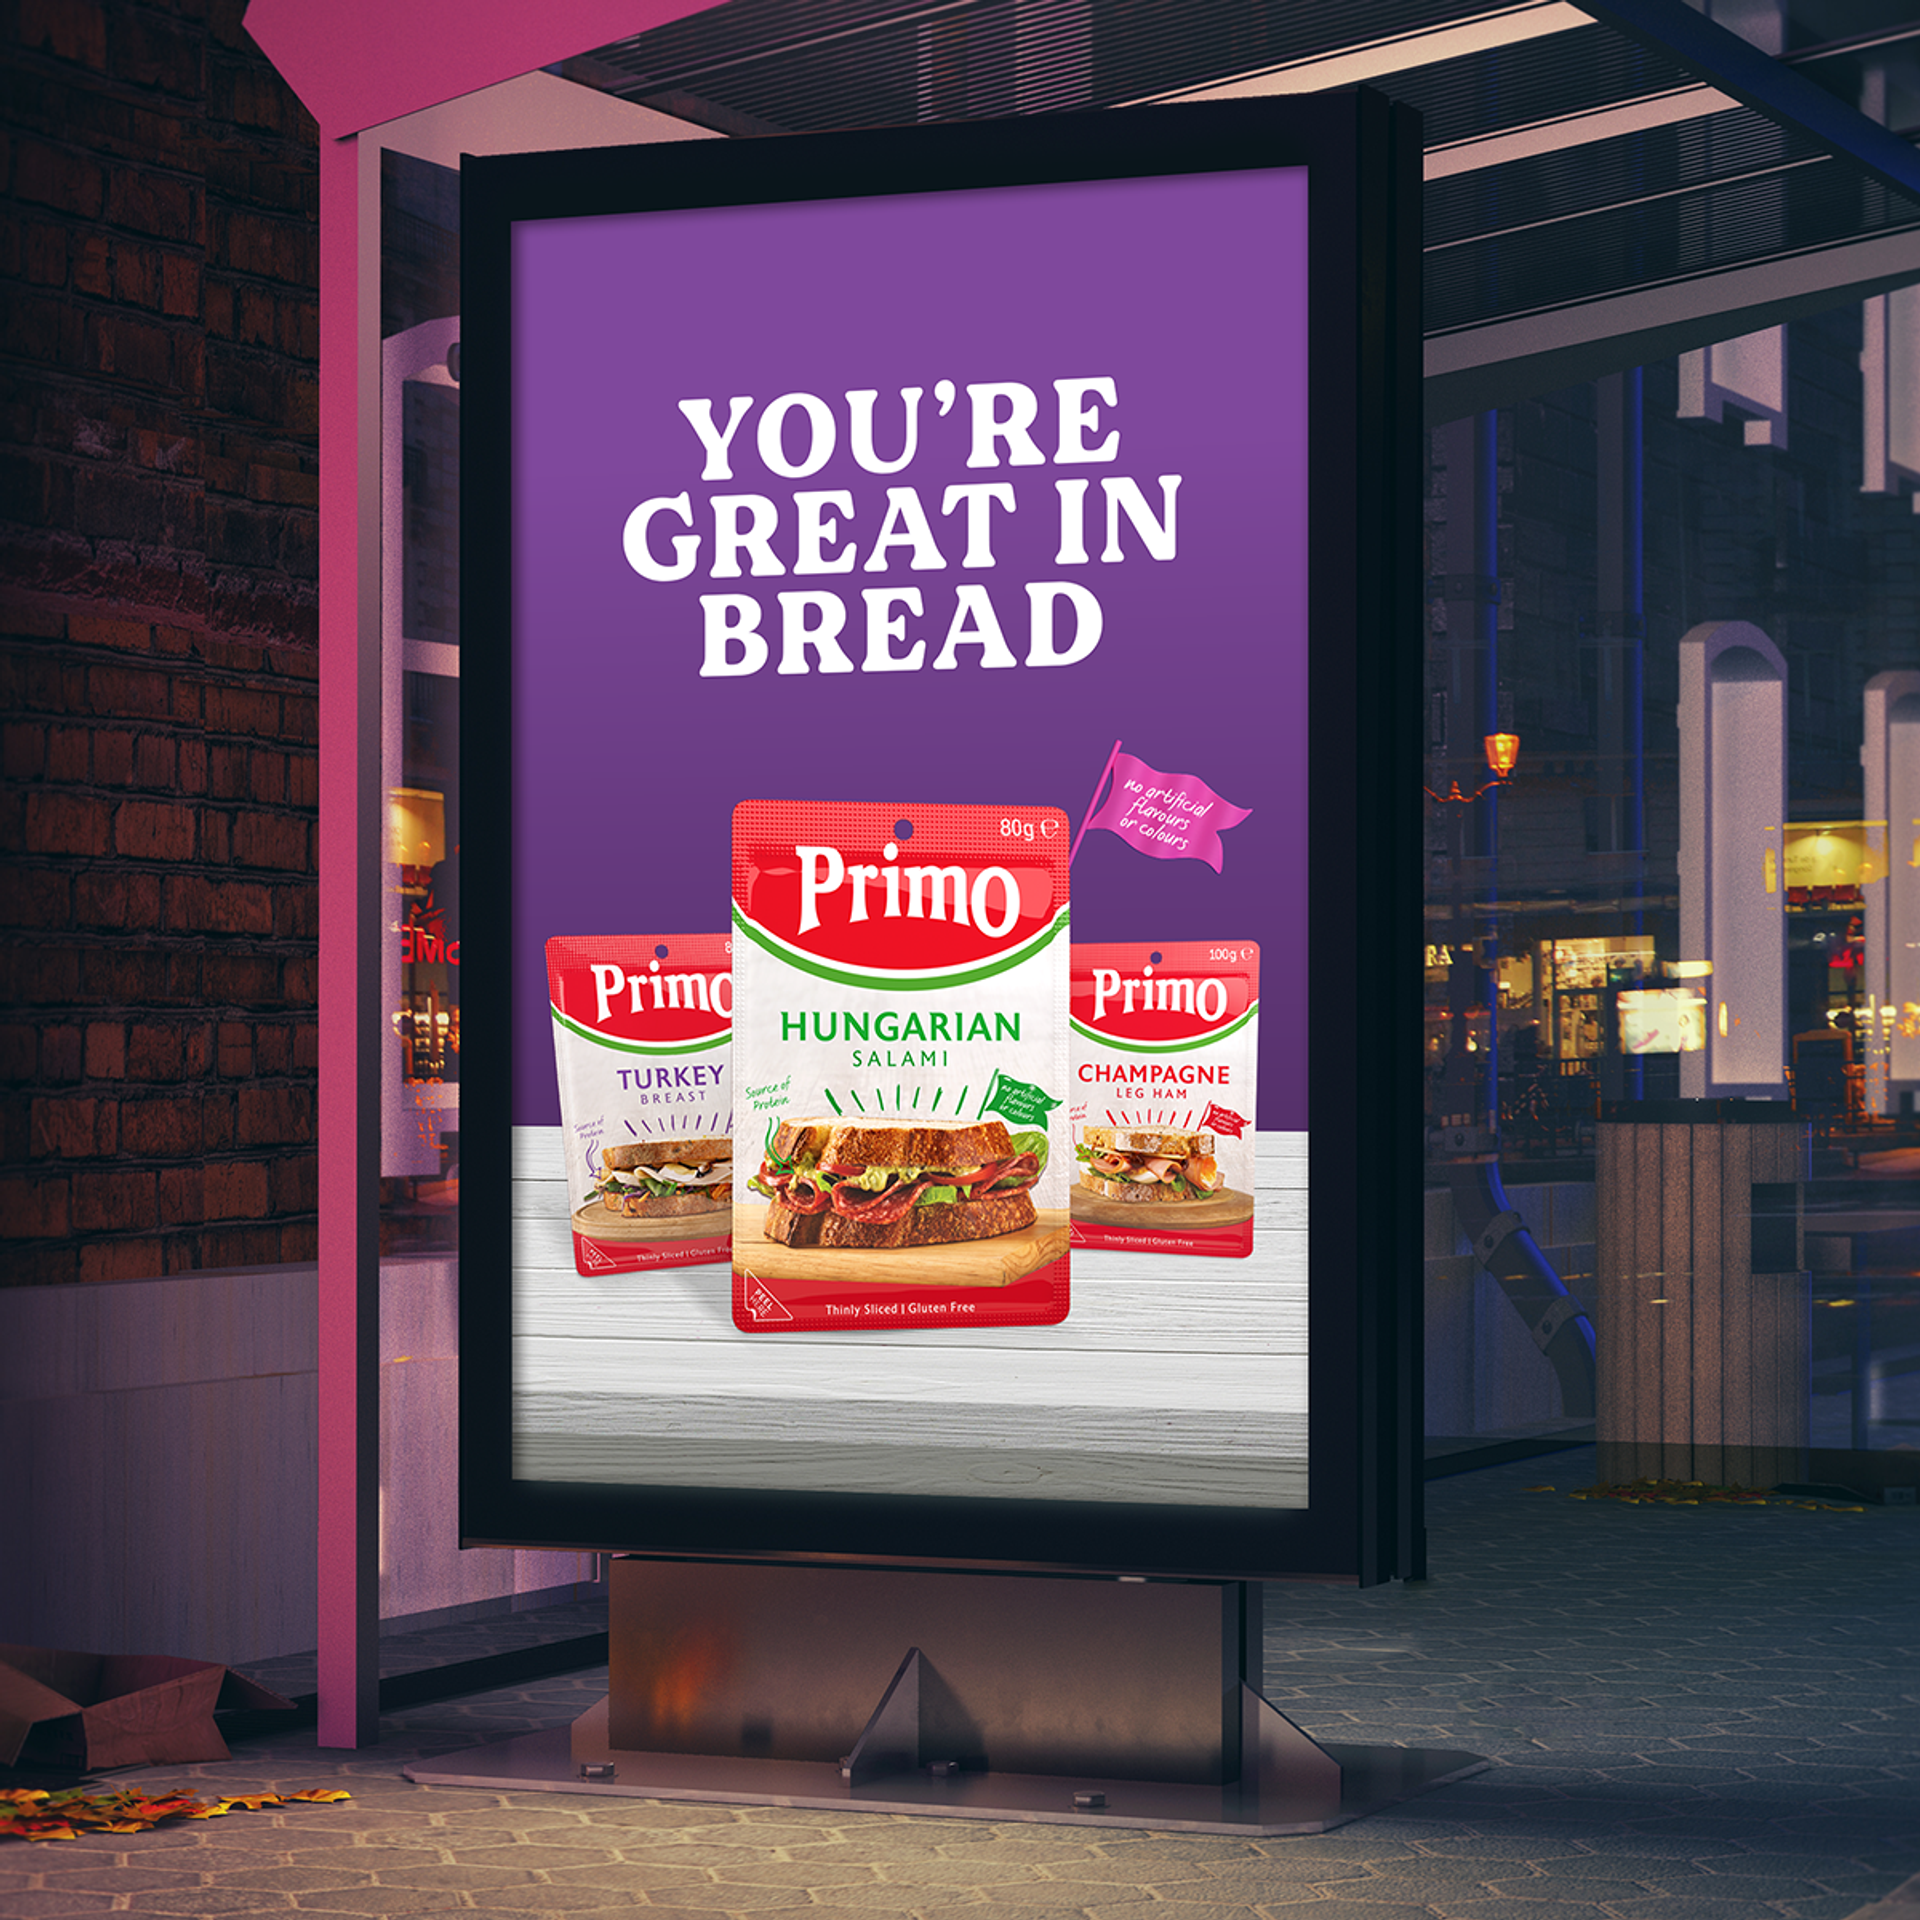 Night time bus shelter meat brand advert featuring Primo packaging design by Our Revolution for Primo’s Hungarian Salami, Turkey Breast, and Champagne Leg Ham, with slogan “You’re great in bread”